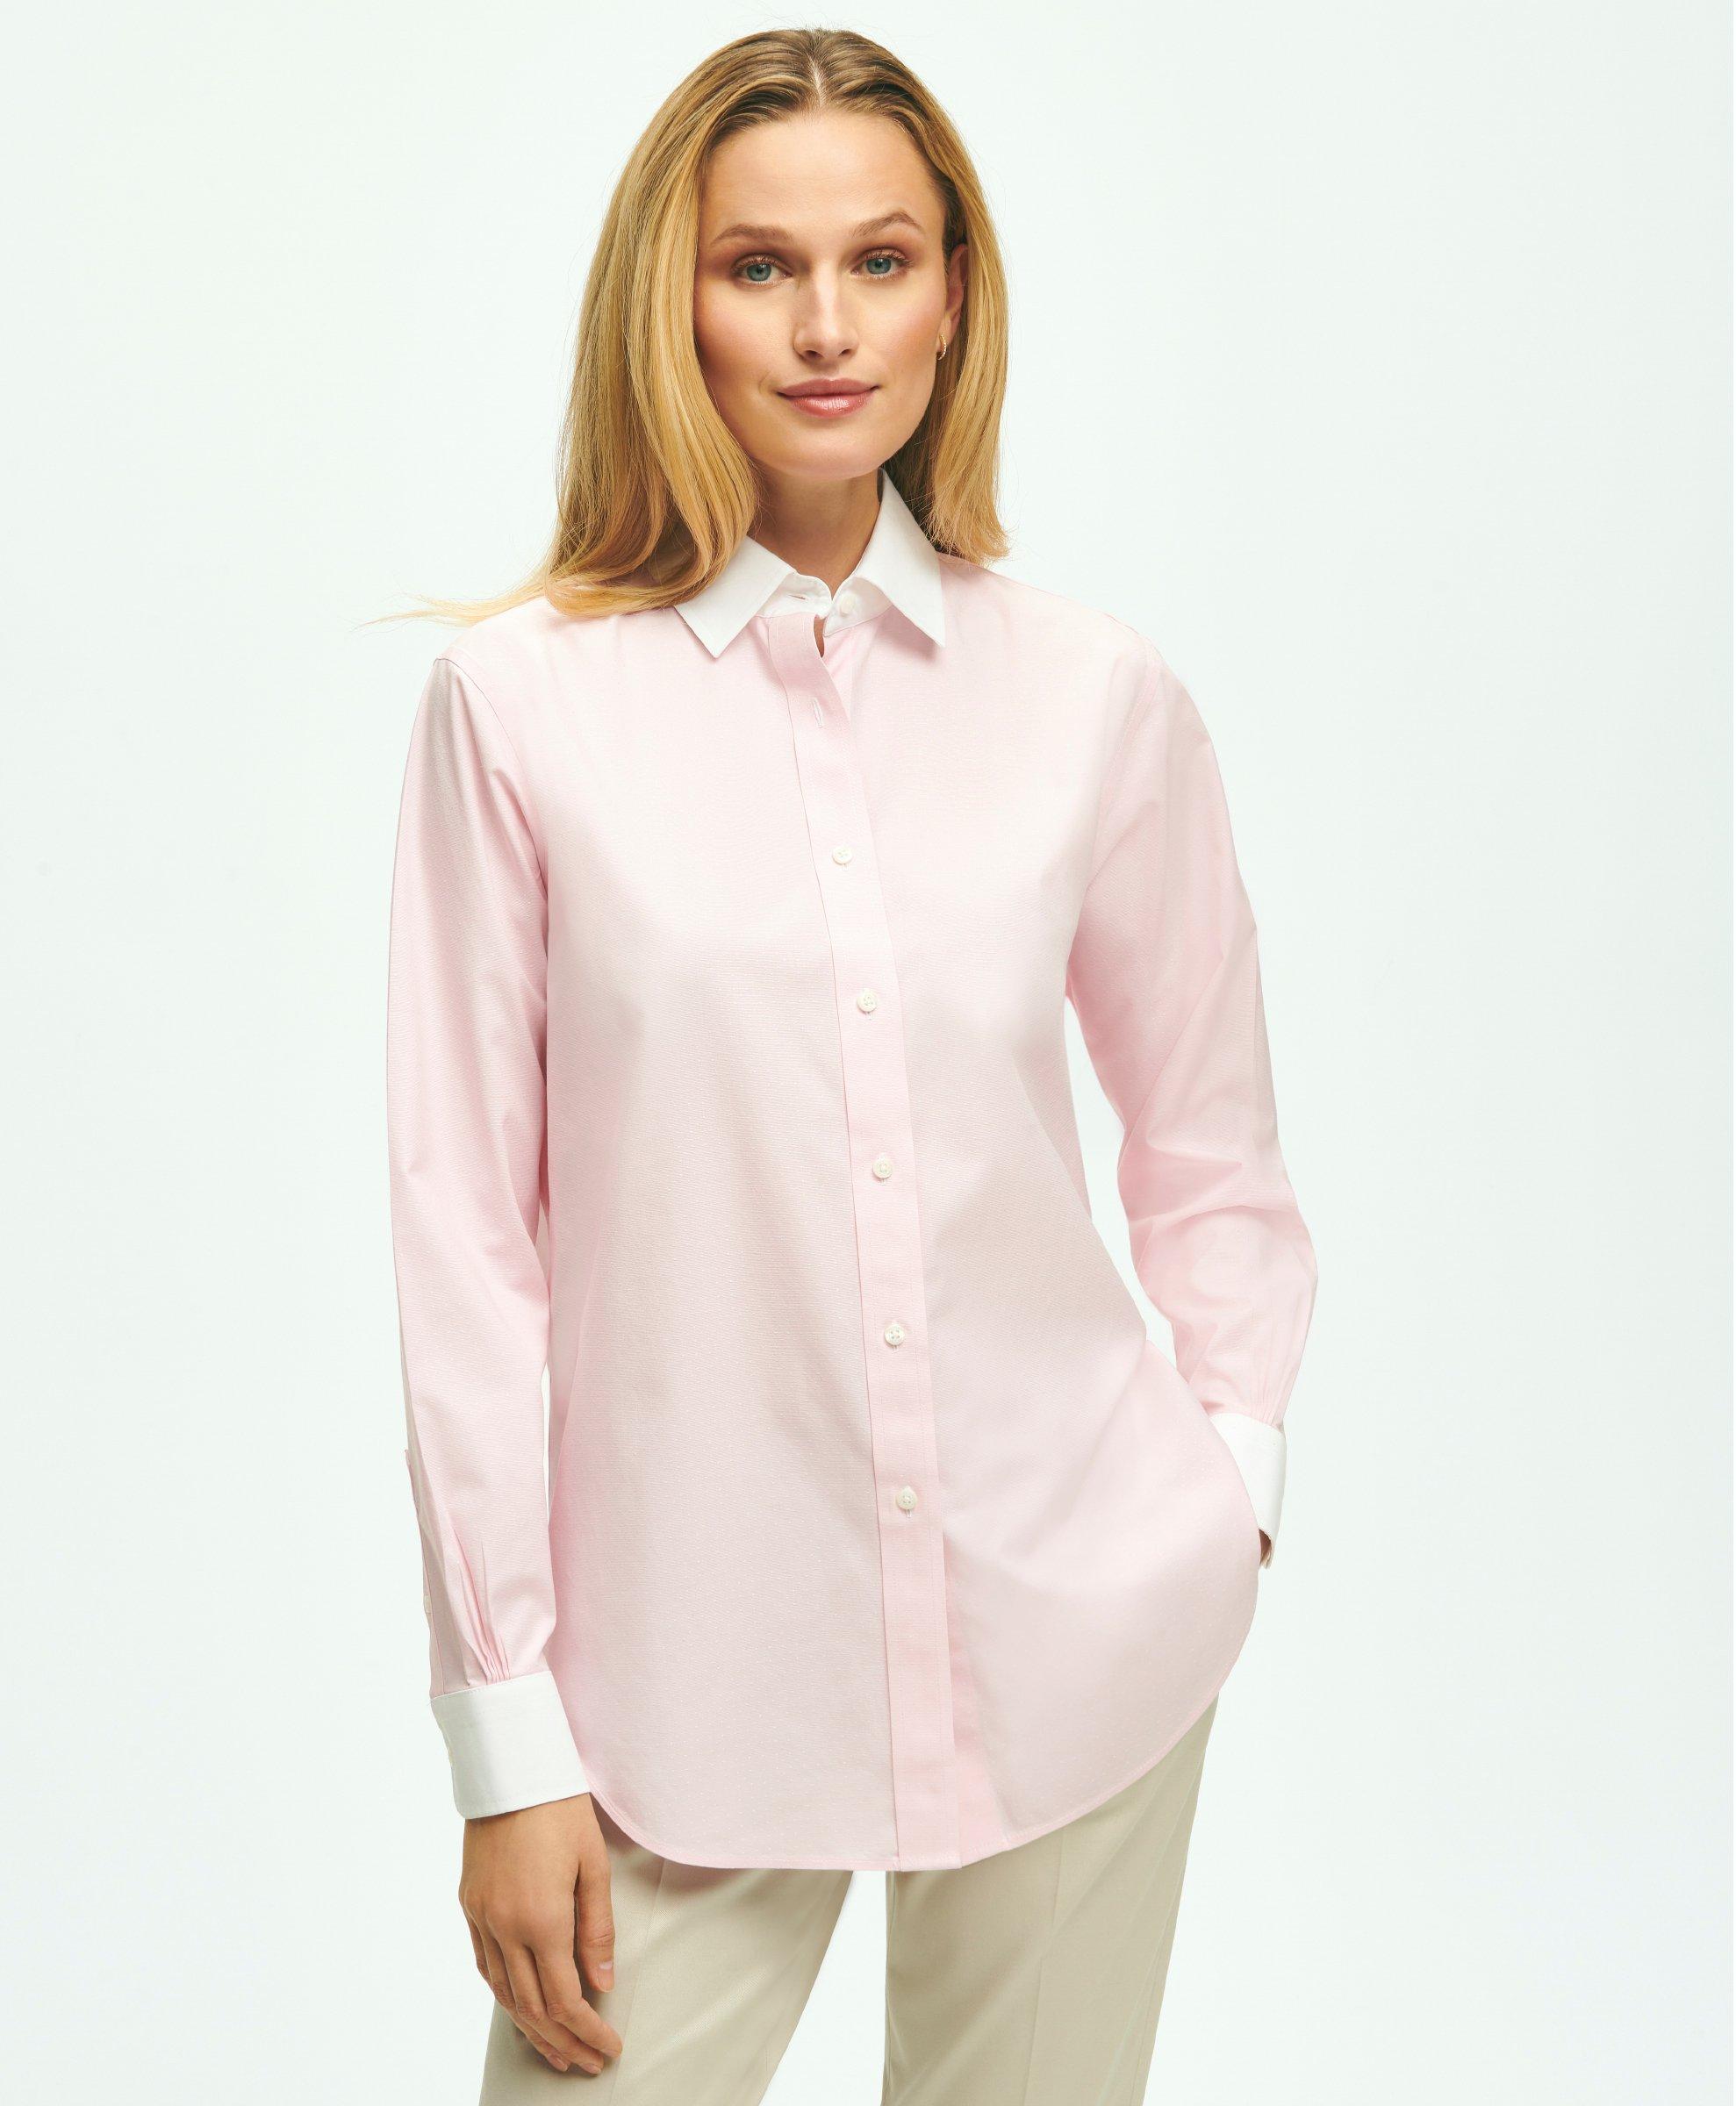 Brooks Brothers Relaxed Fit Non-iron Stretch Supima Cotton Shirt With White Collar & Cuffs | Dark Pink | Size 14